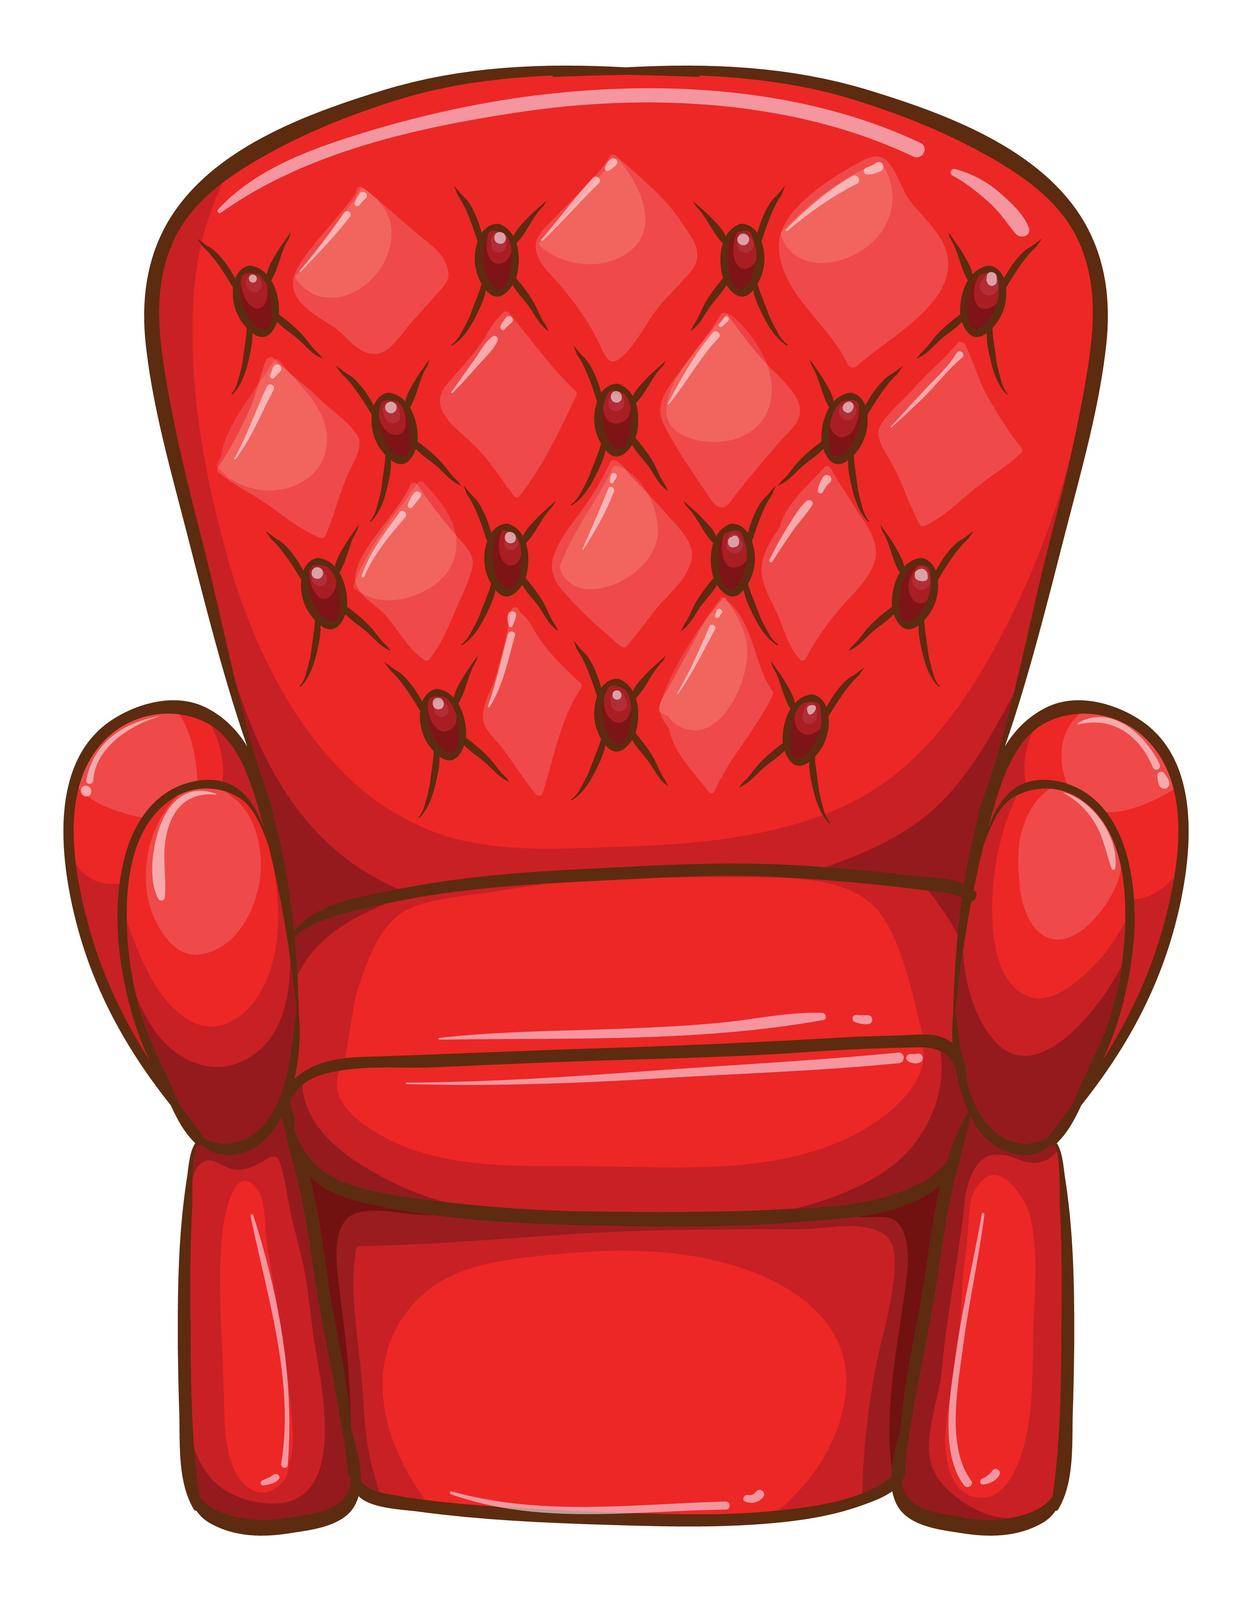 Illustration of a simple drawing of a red chair on a white background